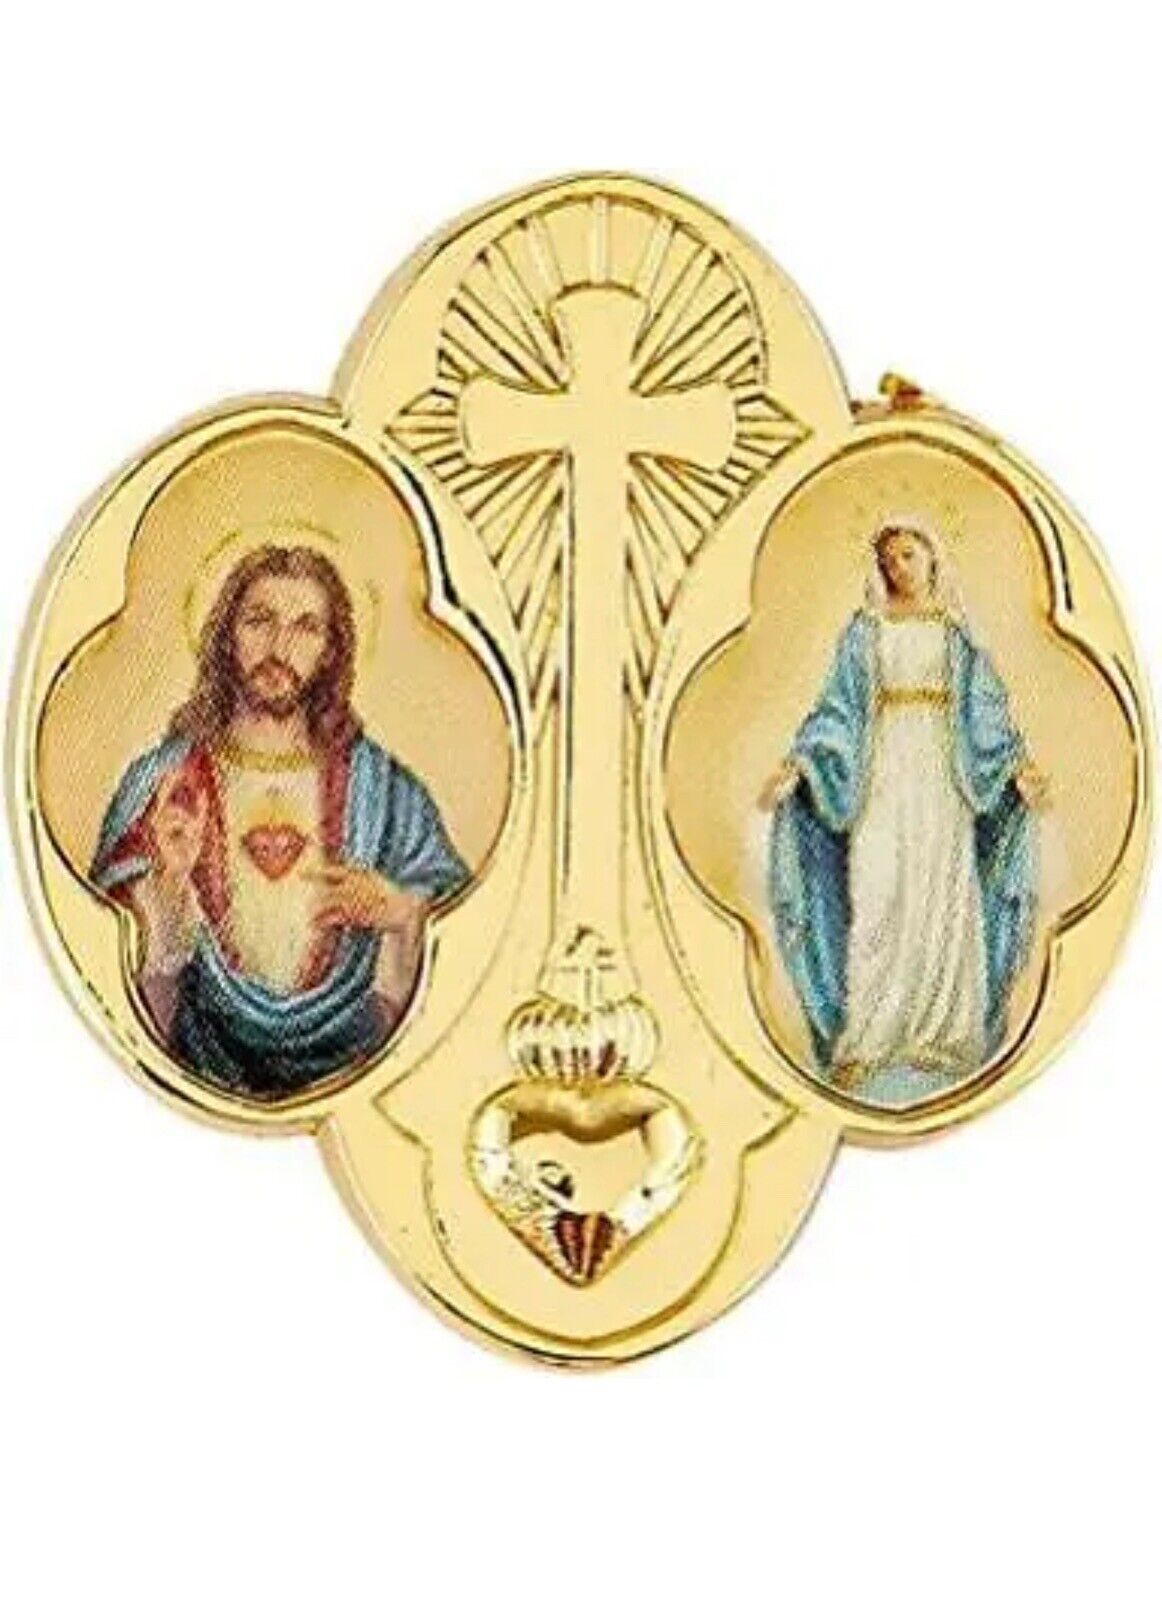 Sacred Heart of Jesus & Miraculous Medal Gold Plated Religious Cross Lapel Pin